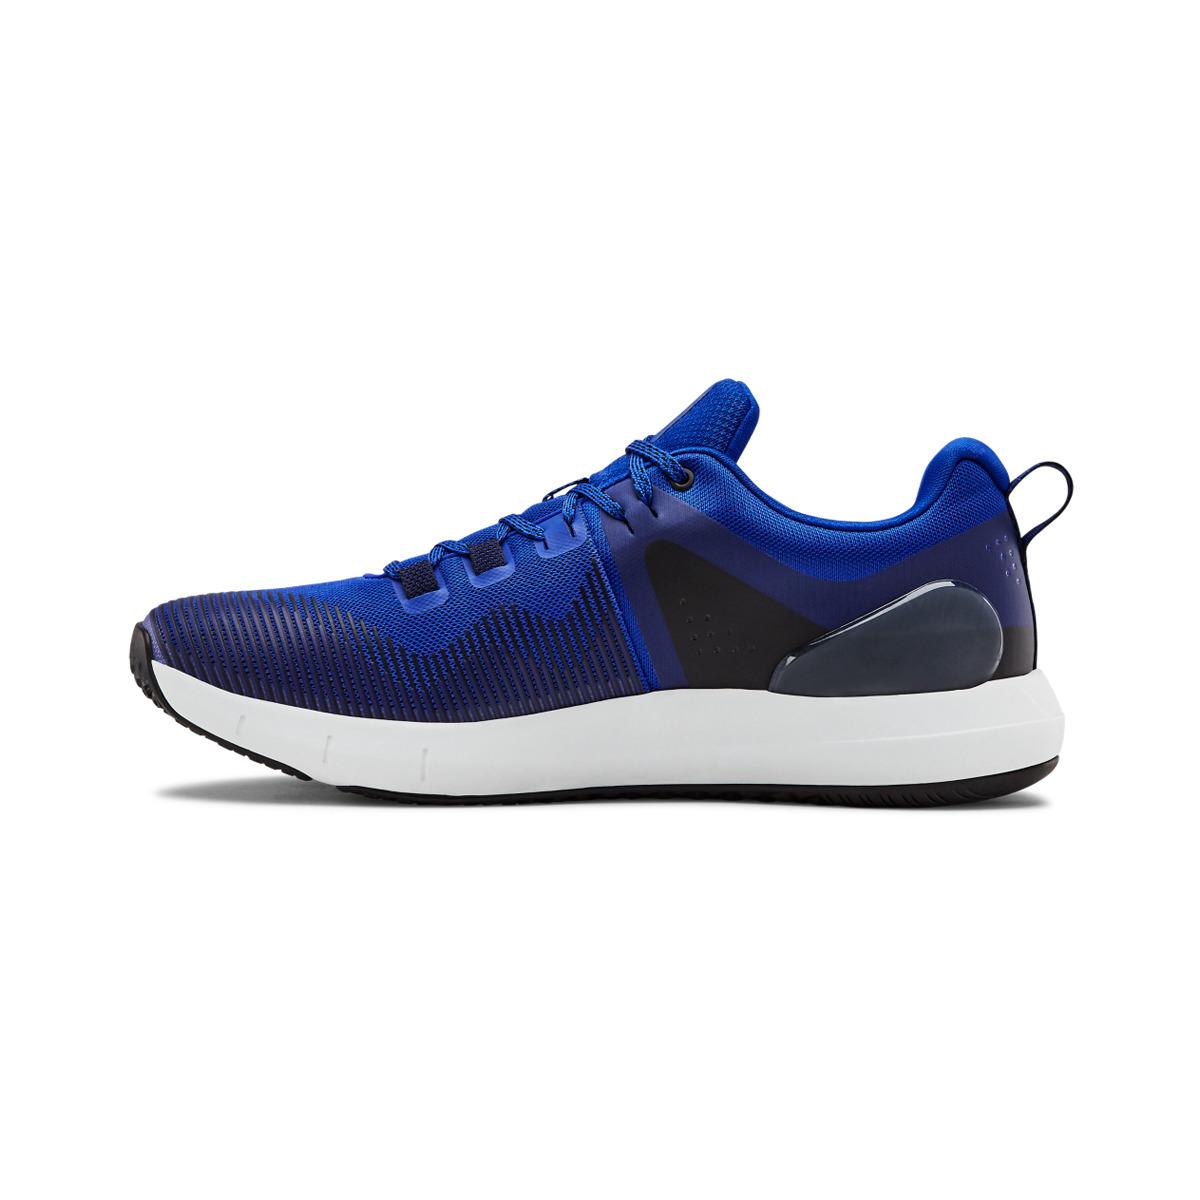 Under Armour Rubber Hovr Rise Training Shoes in Blue/White (Blue) for ...